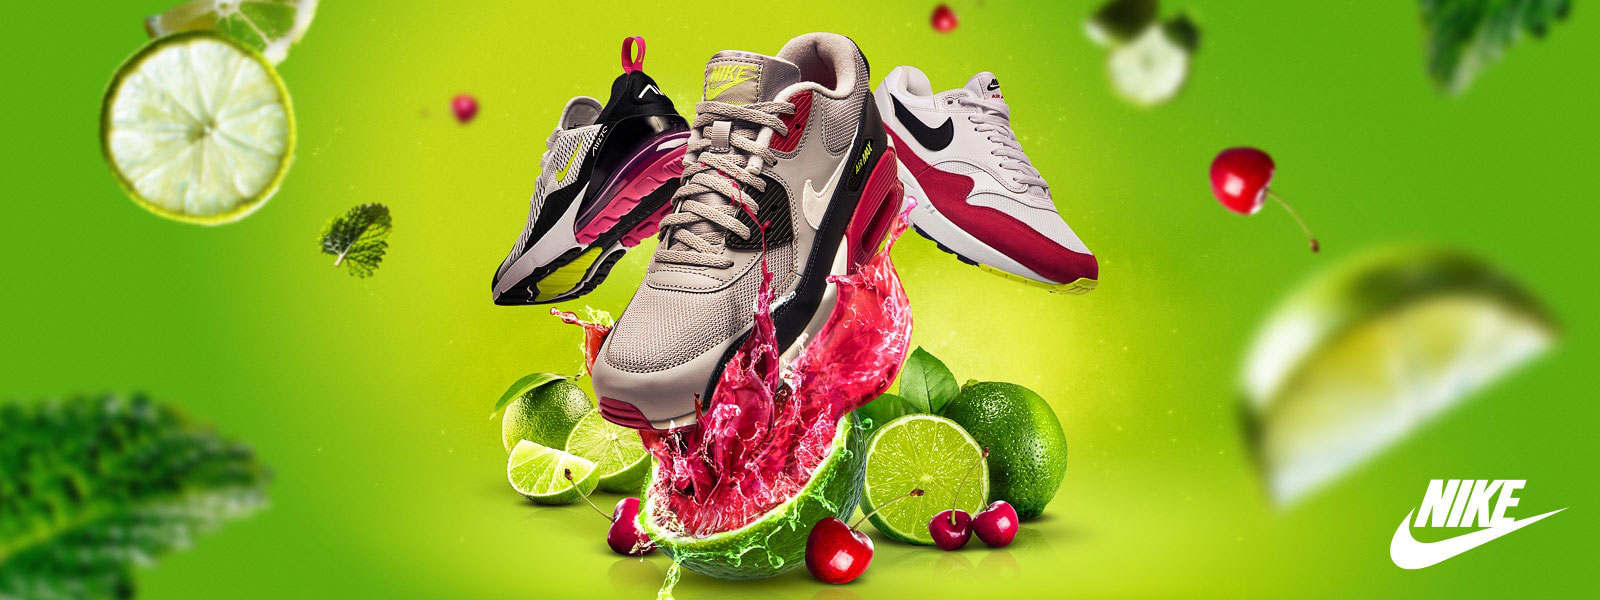 nike-air-max-pink-limeaid-sneakers-where-to-buy